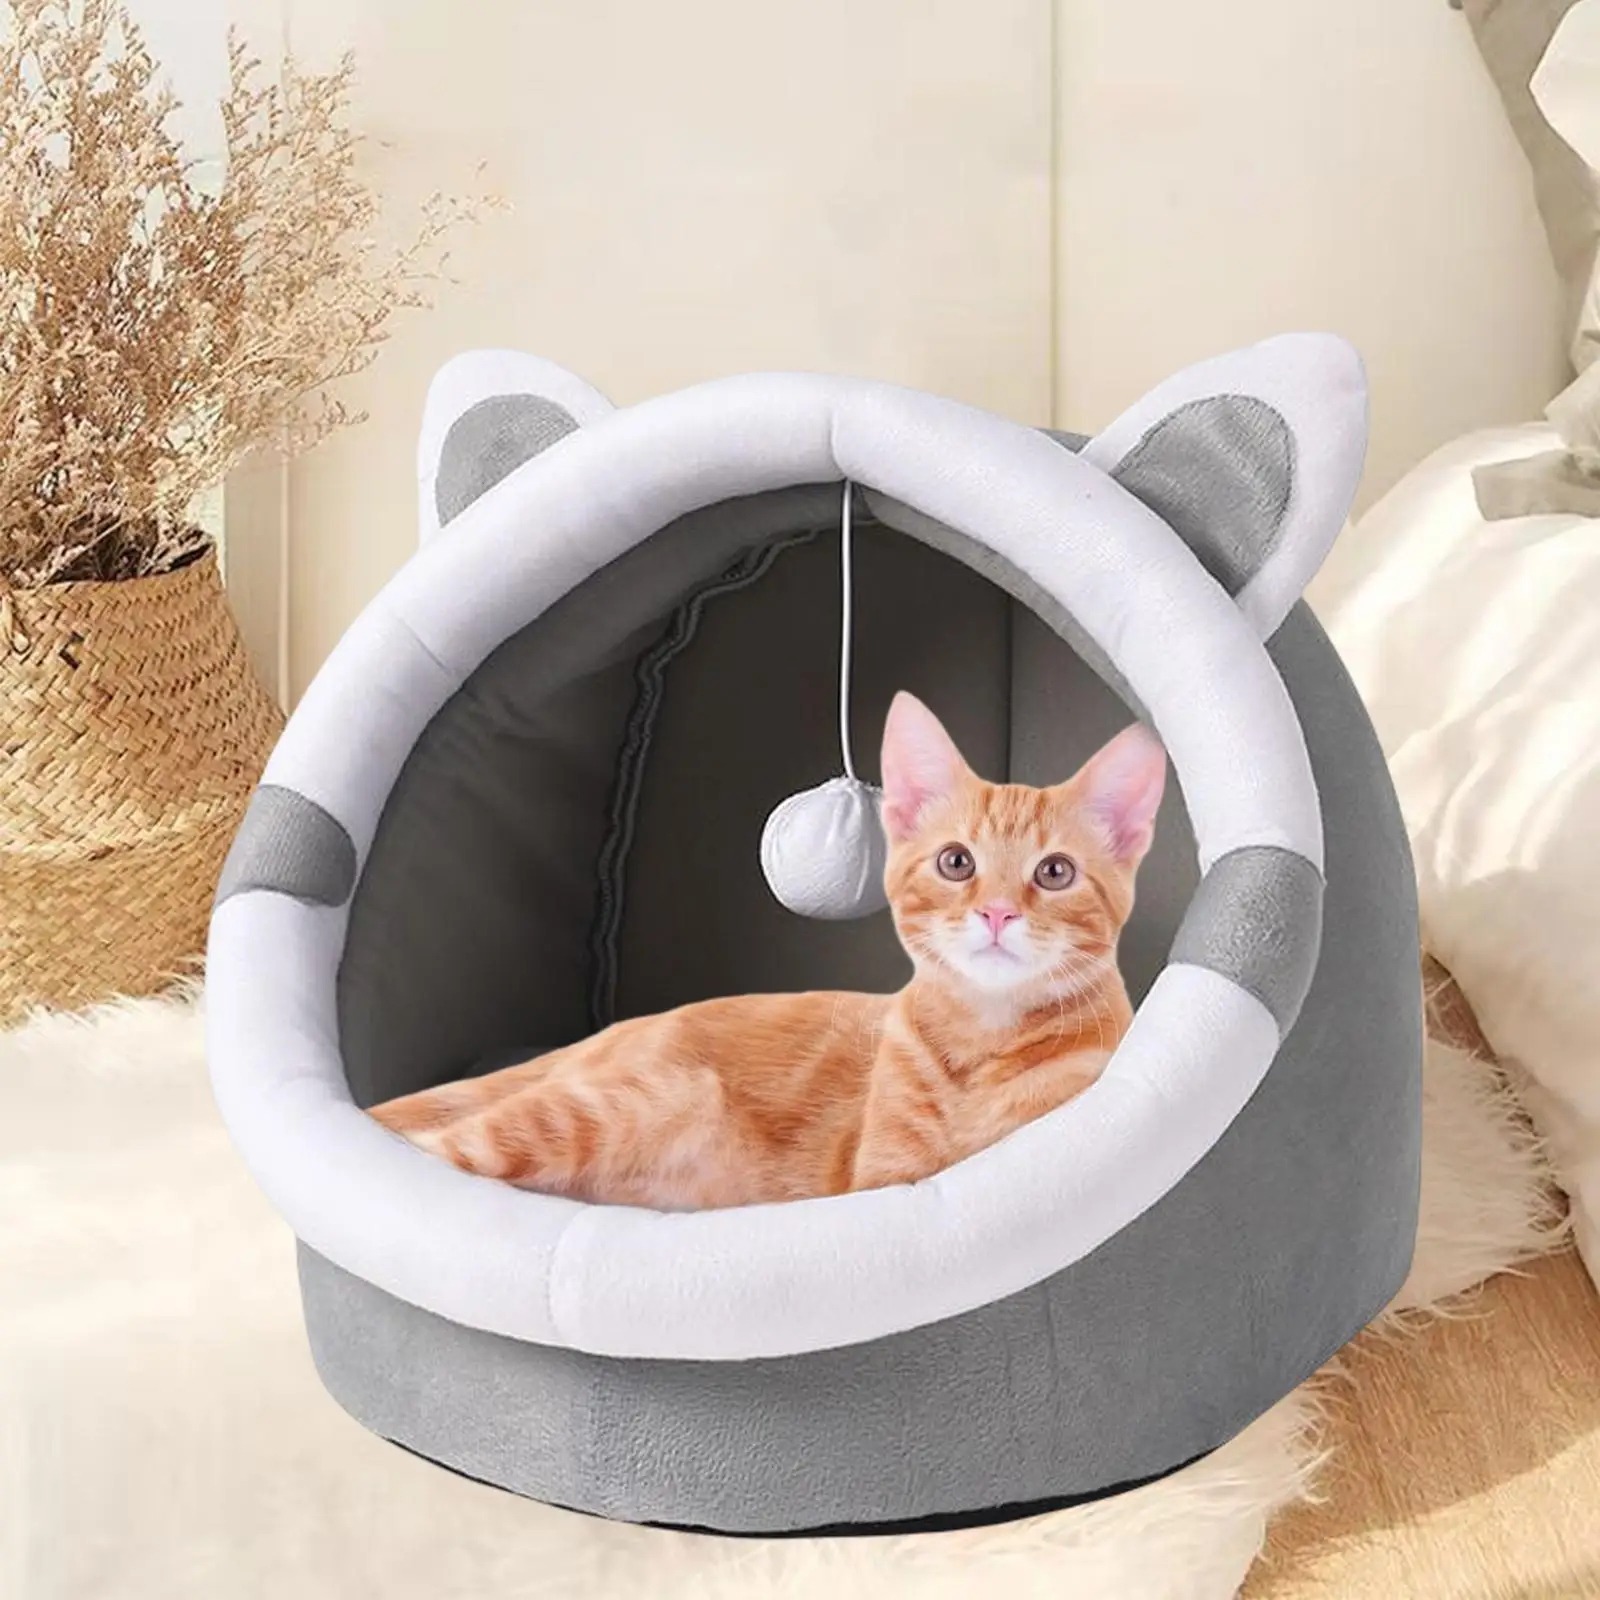 Soft Plush Cat Beds for Indoor Cats Warm Nest Pet Sofa Bed with Hanging Toy